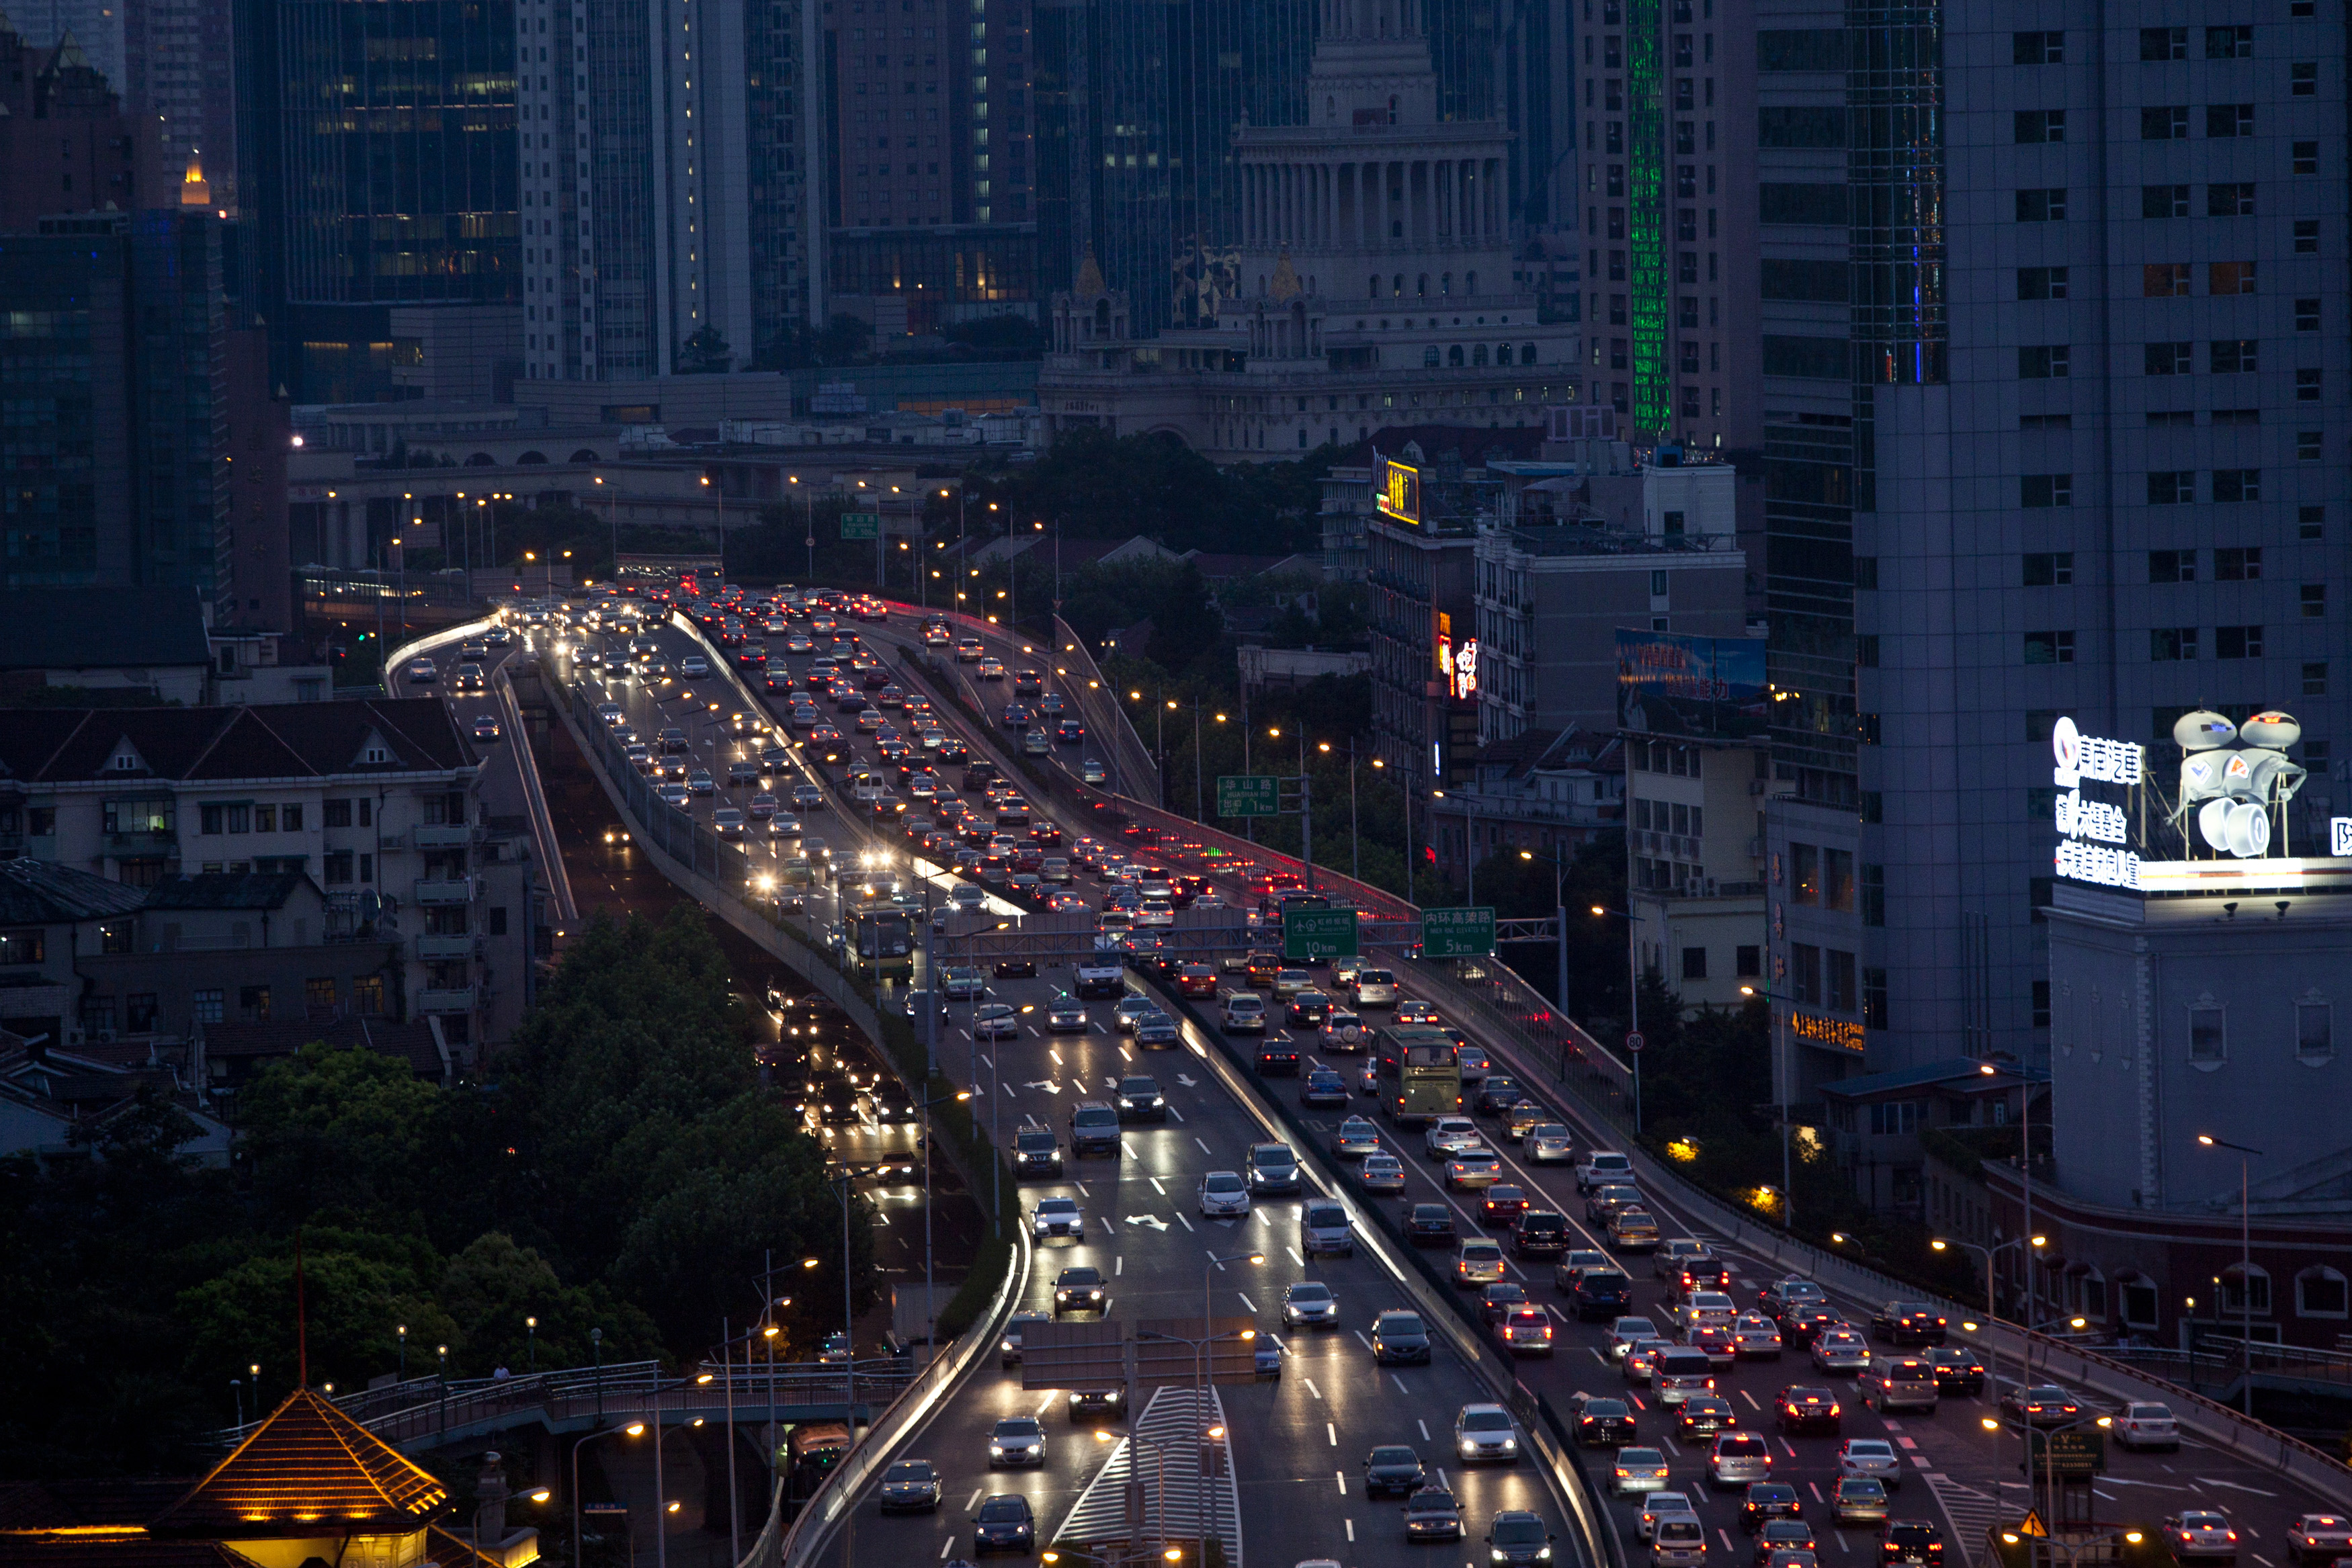 Lines of cars are pictured during a rush hour traffic jam in central Shanghai July 11, 2013.